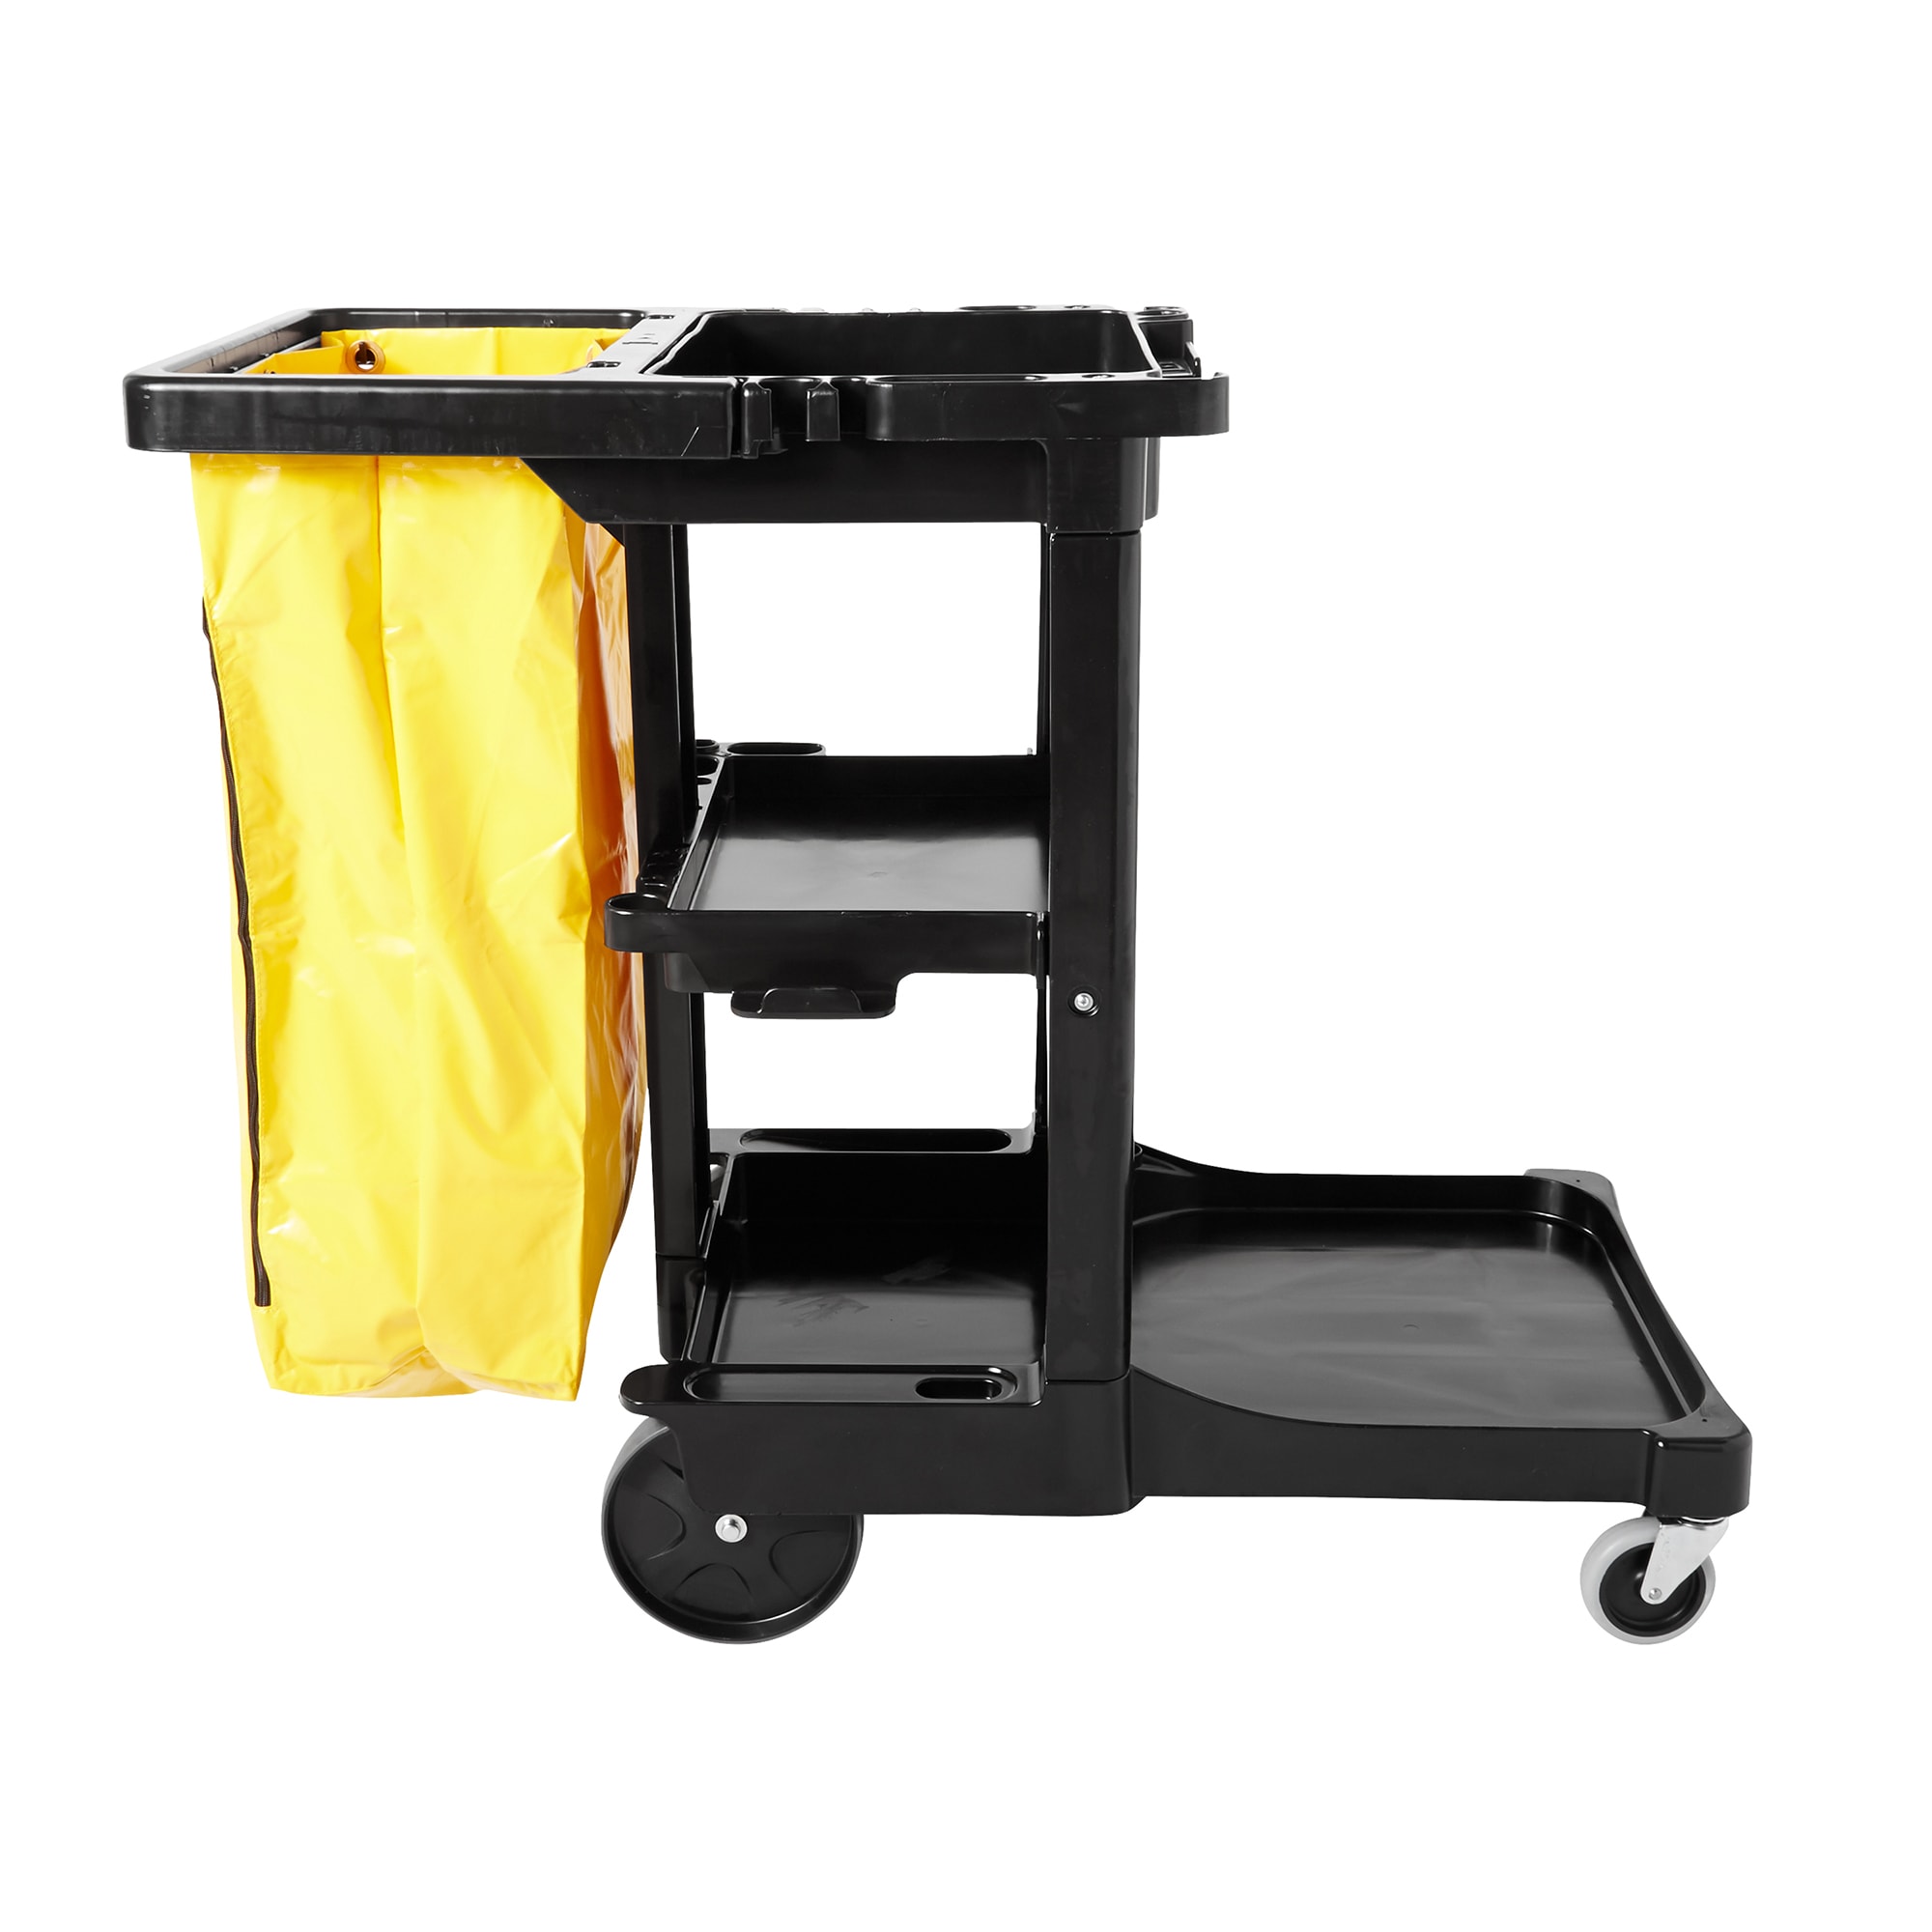 Rubbermaid FG617388BLA Cleaning Cart with 20 Gallon low Vinyl Bag